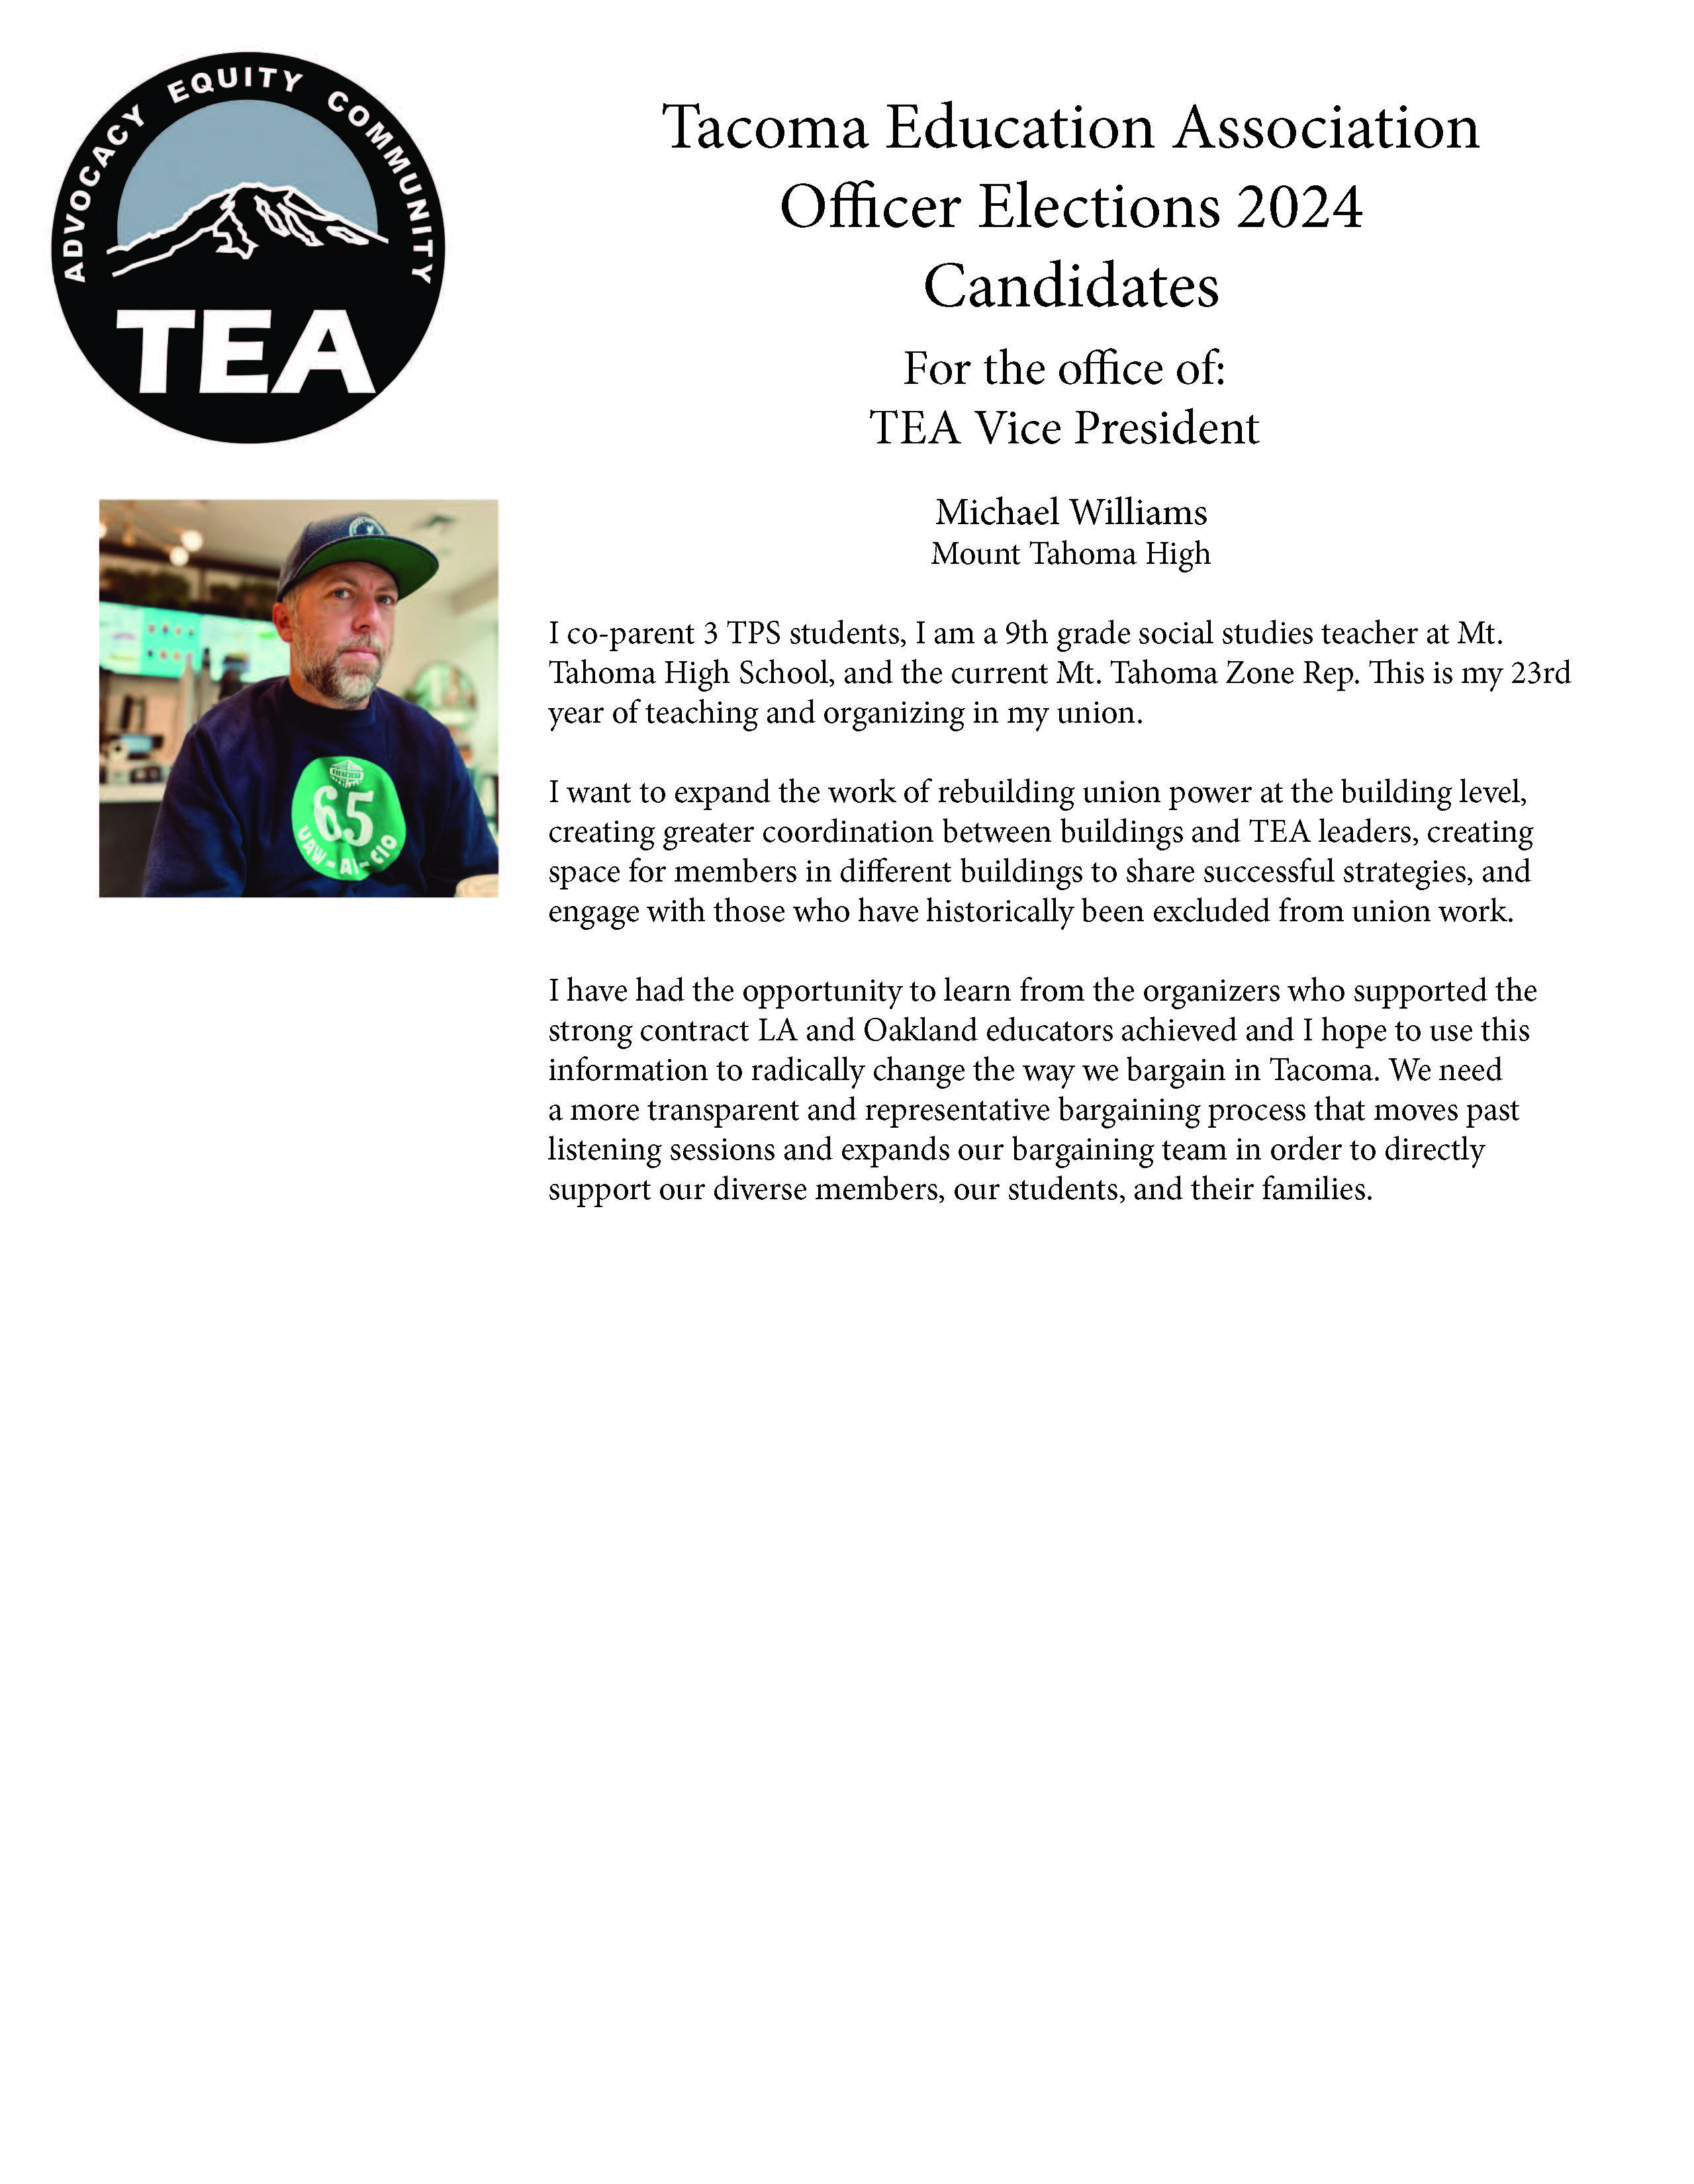 Jofficer elections 2024 candidate statements 6_Page_4